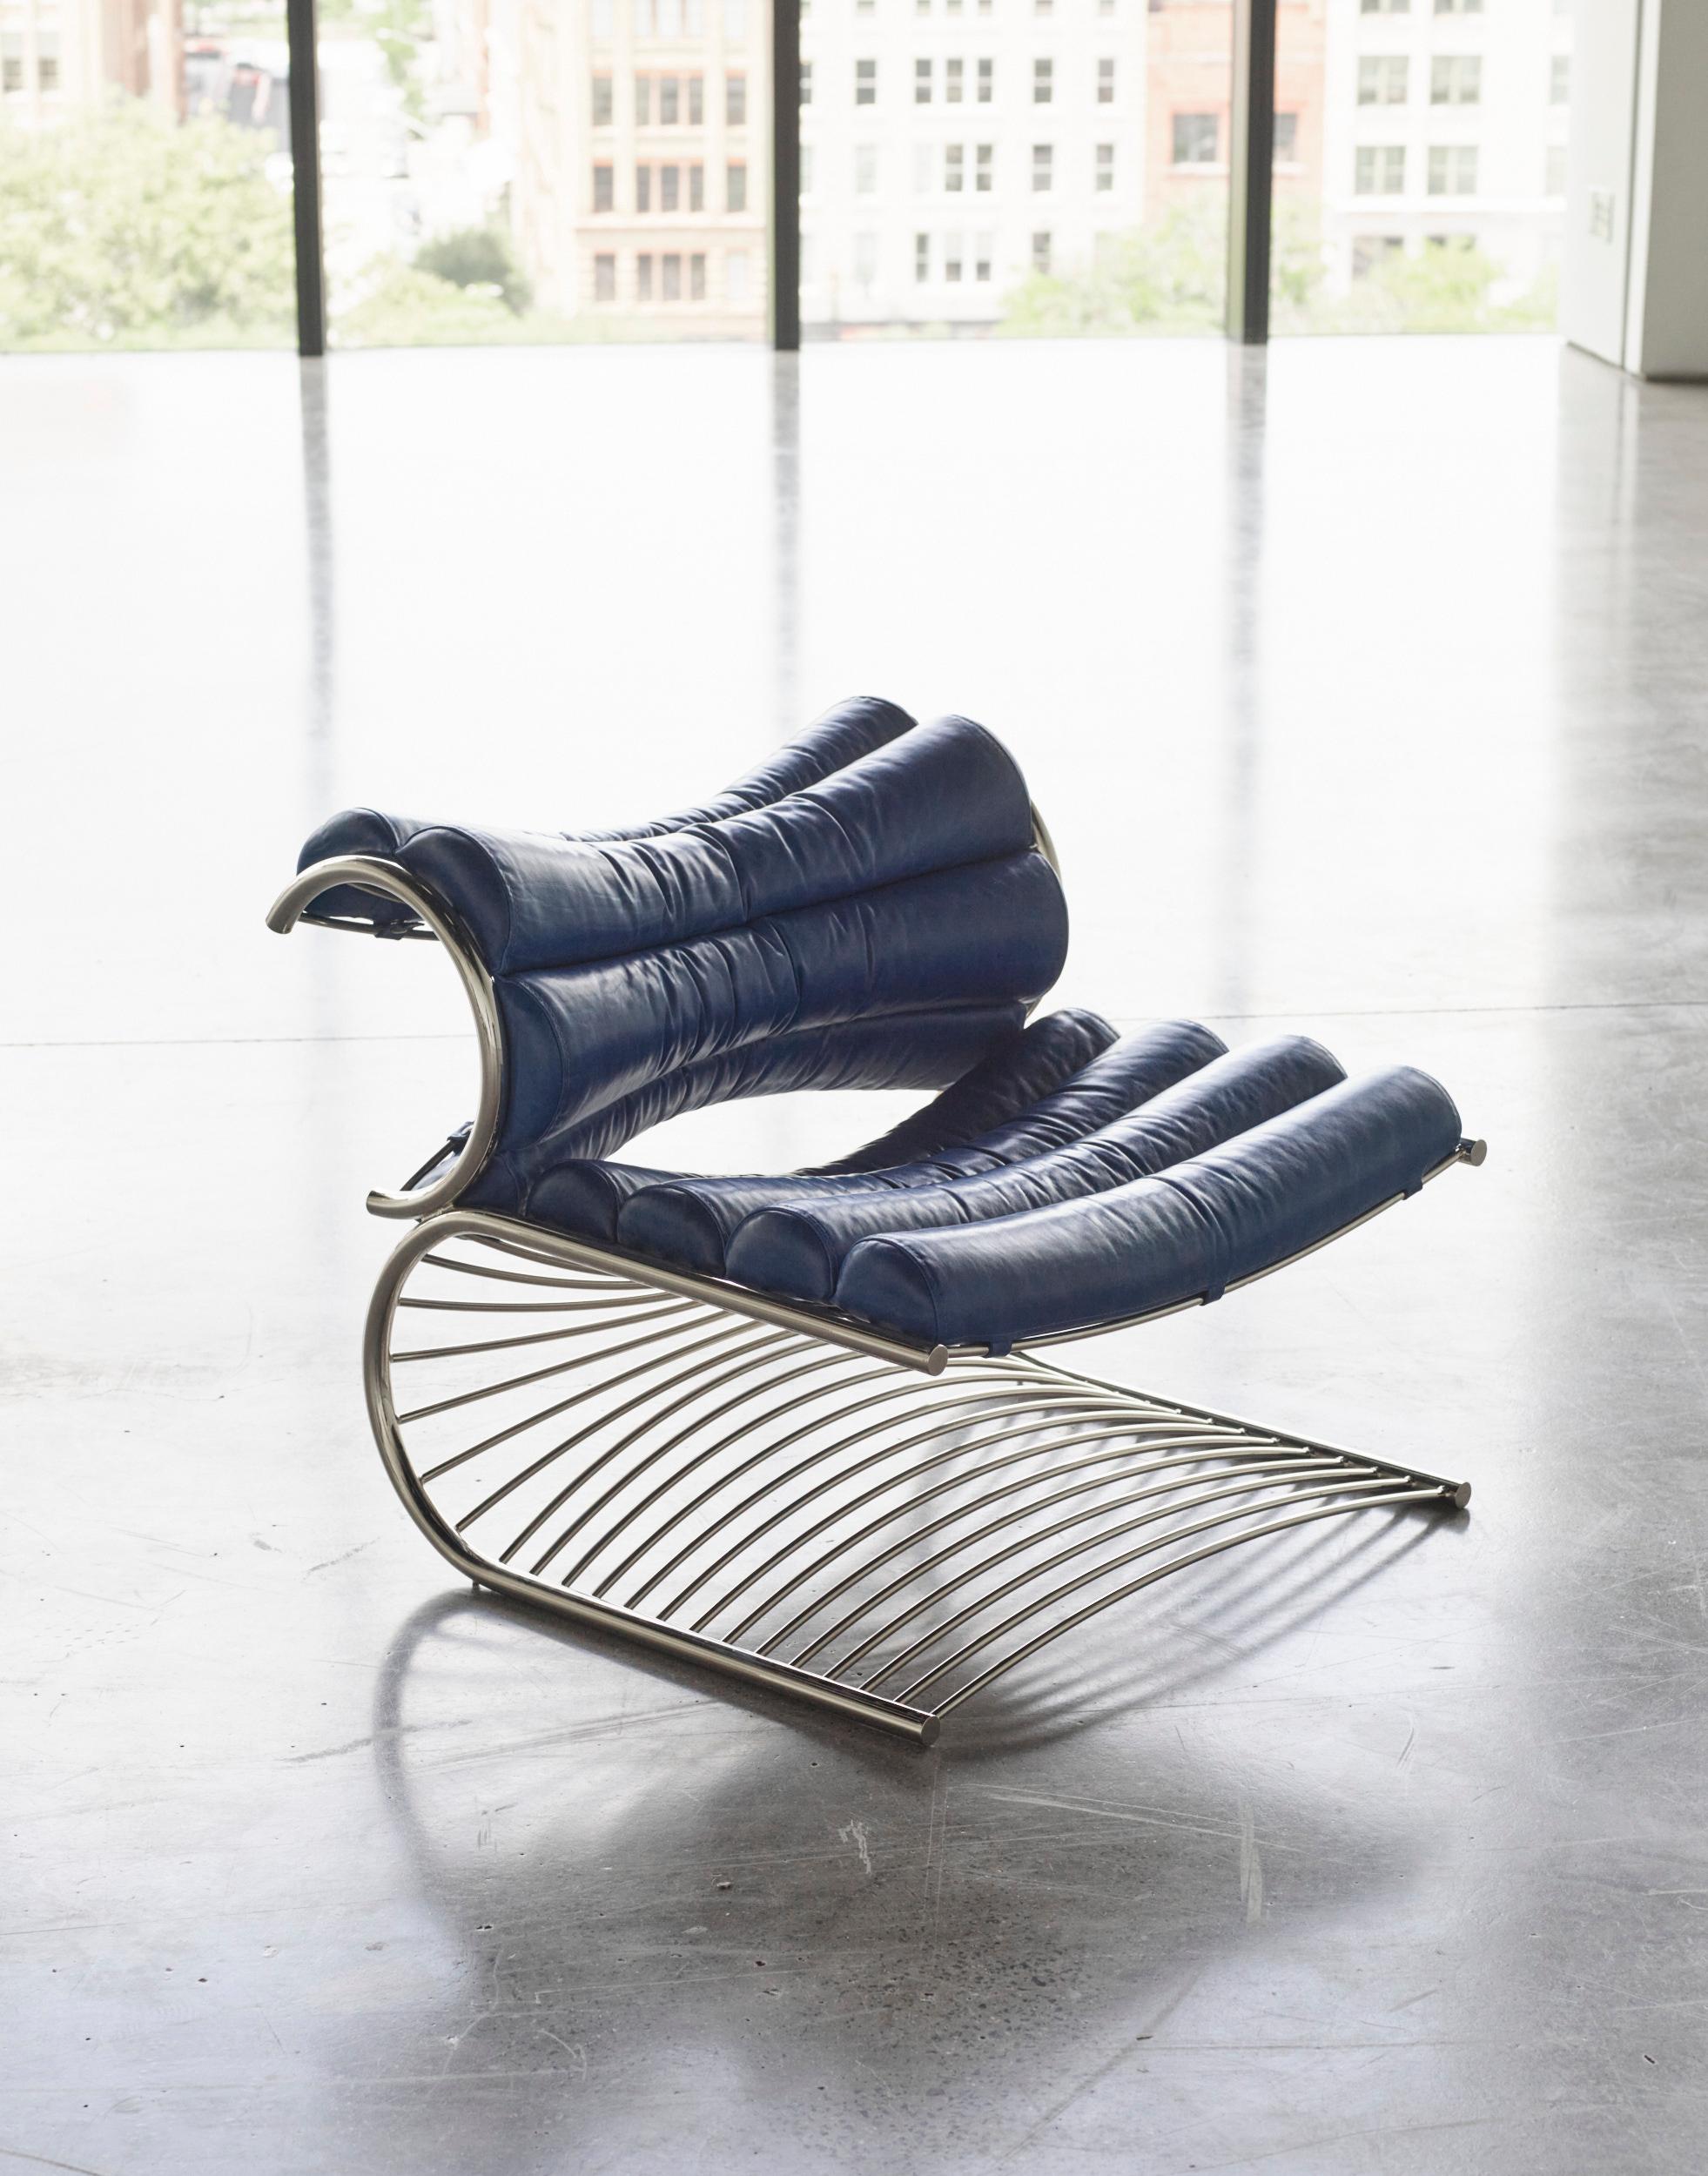 Number two fauteuil by Rue Intérieure
Dimensions: 78.74 x 68.58 x H 66.04 cm
Materials: Steel, leather
Designed and made in Montreal, Canada.

Other leather and metal finishes available. 

Clear lines and beautiful curves intertwined to